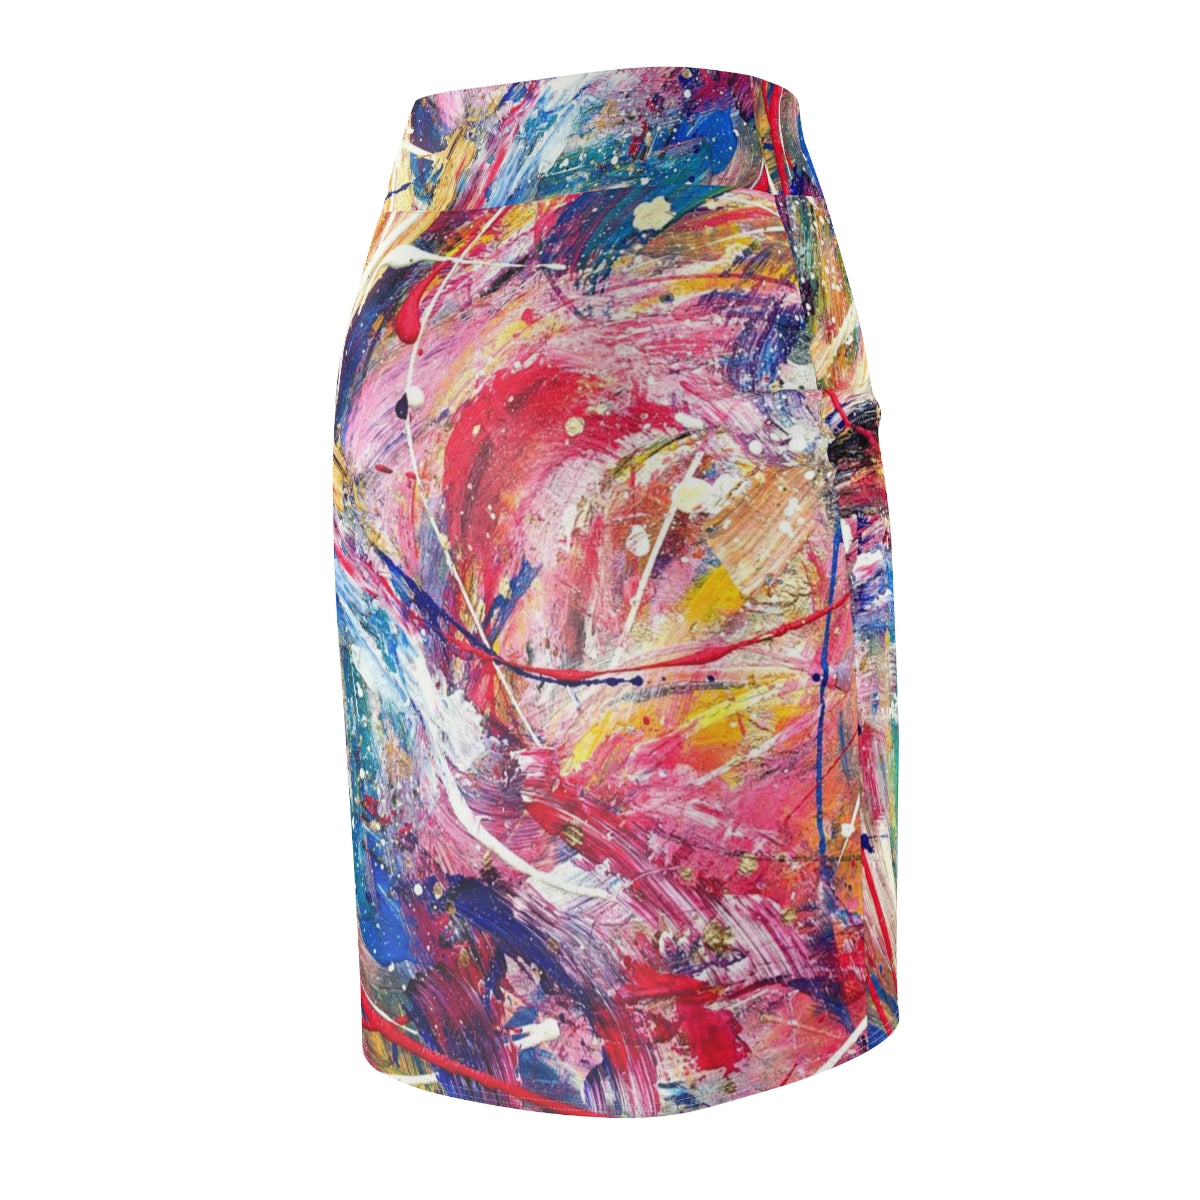 "Free to Move & Change" Women's Pencil Skirt